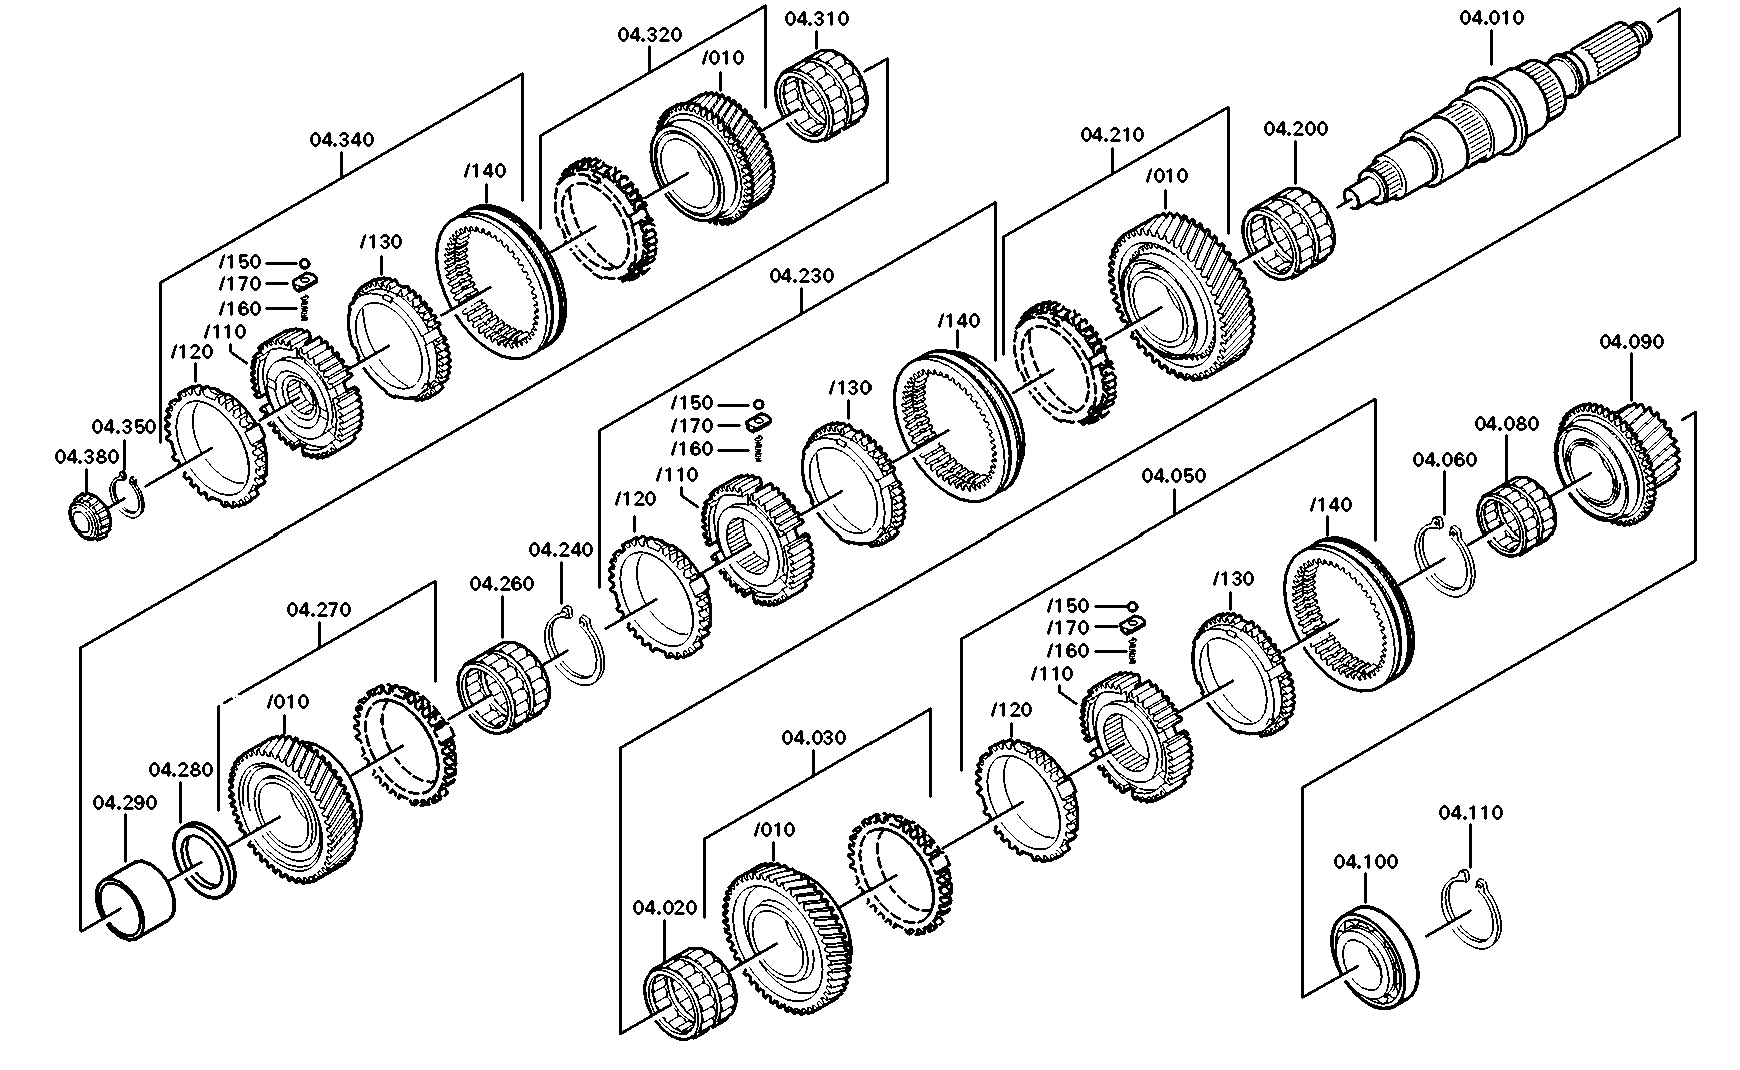 drawing for NIVISA 07902936-0 - HELICAL GEAR (figure 1)